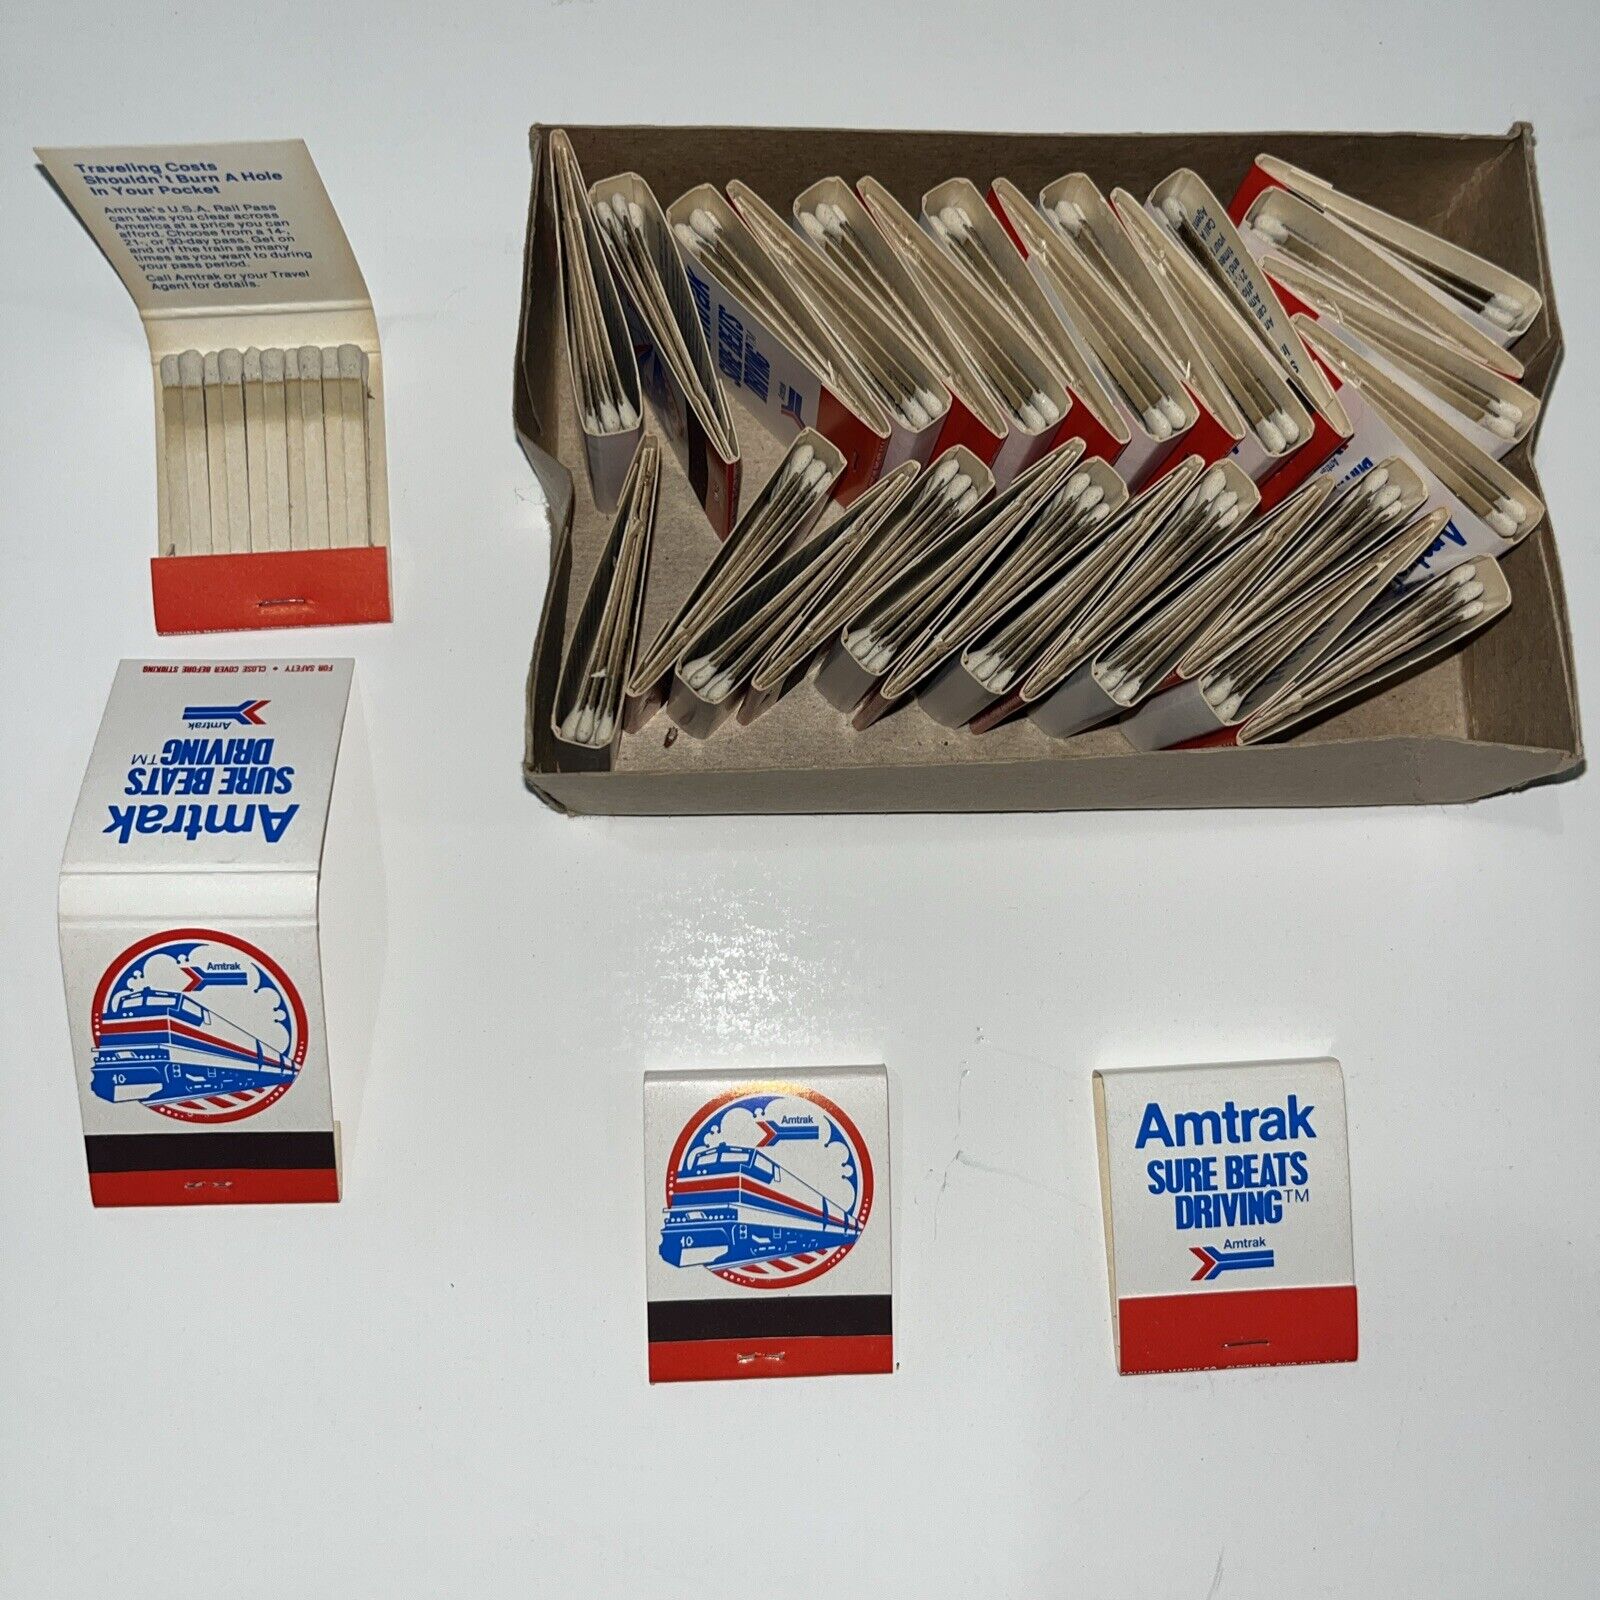 31 AMTRAK Rail New Books Of Matches - All  Unused.  “Sure Beats Driving” Advert